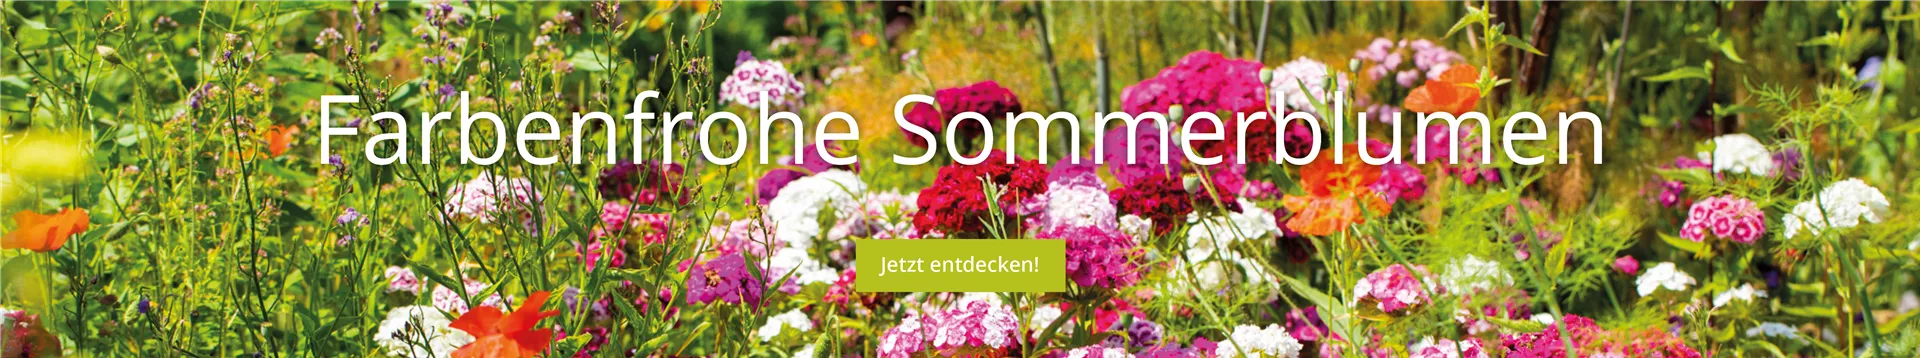 Farbenfrohe-Sommerblumen.png